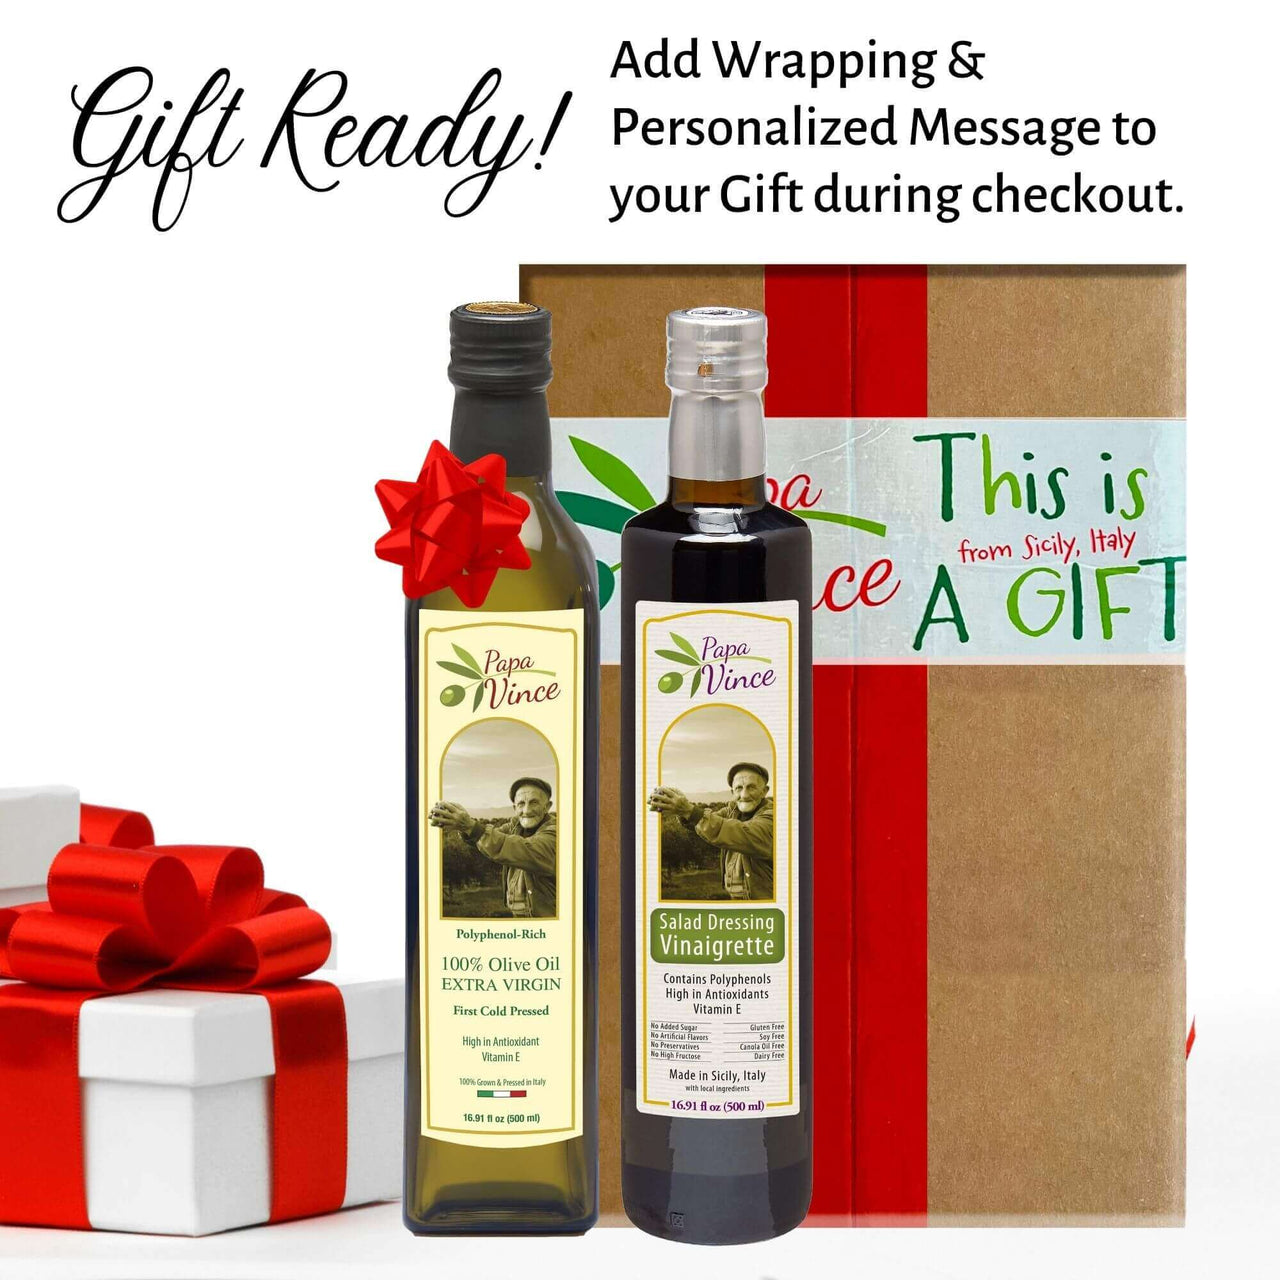 Extra Virgin Olive Oil & Salad Dressing Gift Set from Sicily, Italy - Unblended, First Cold Pressed Dec 2022/23 | 8-years aged in wood | made by our family in Sicily | VEGAN, KETO, PALEO | Gift Set for men and women | 16.91 fl oz each